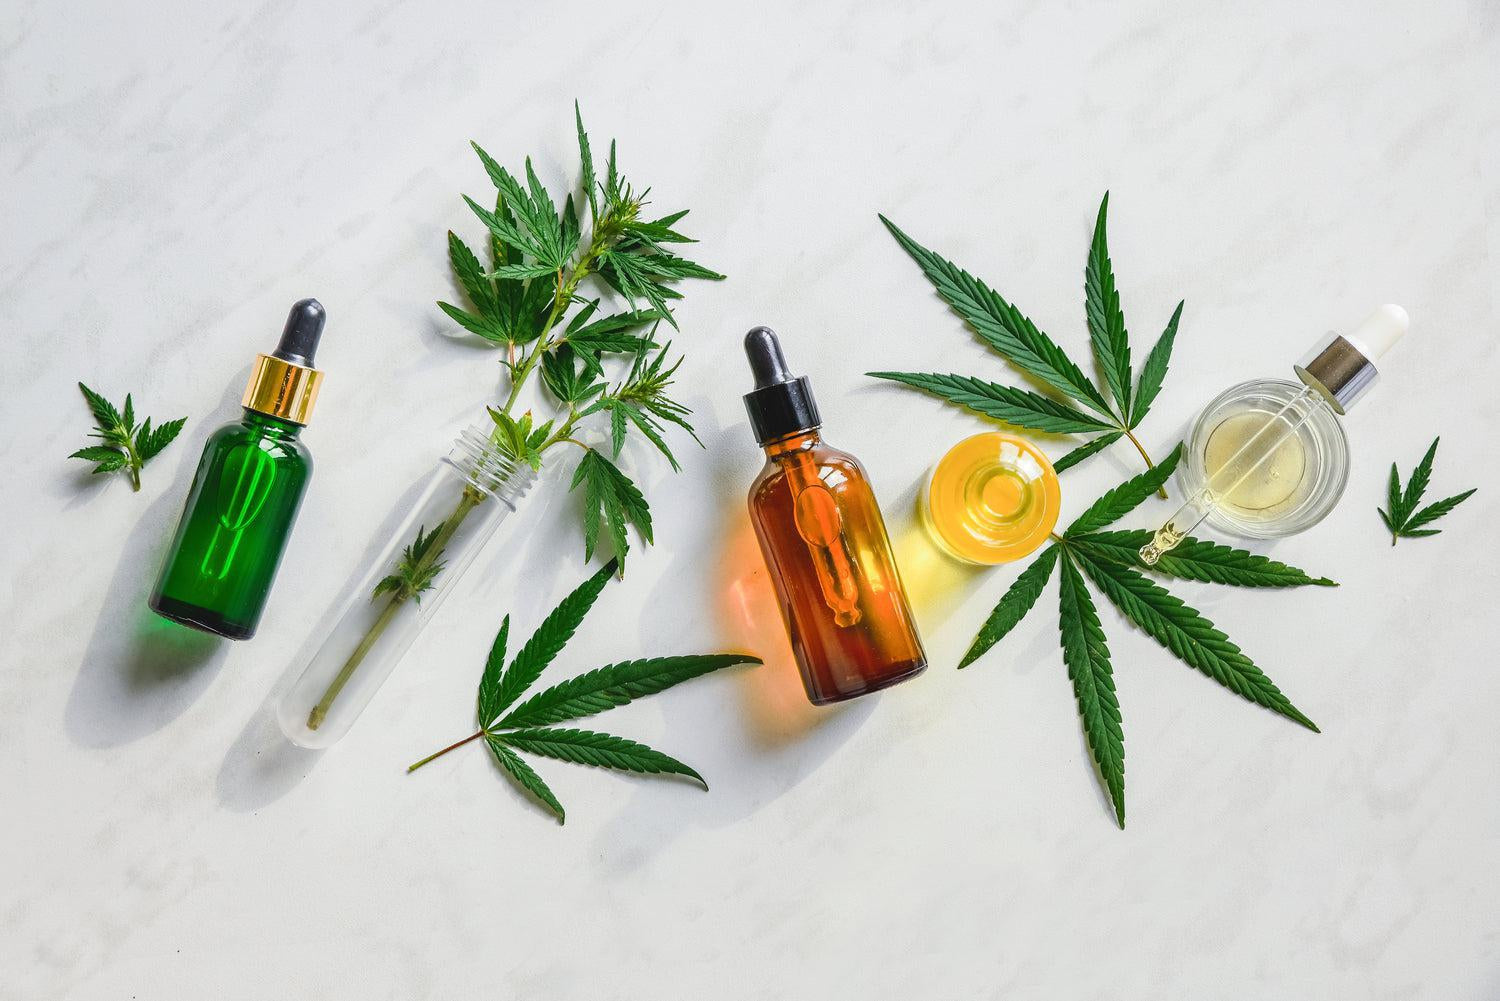 Green, amber, and clear dropper bottles are laying on a white marble background with marijuana leaves placed around them.